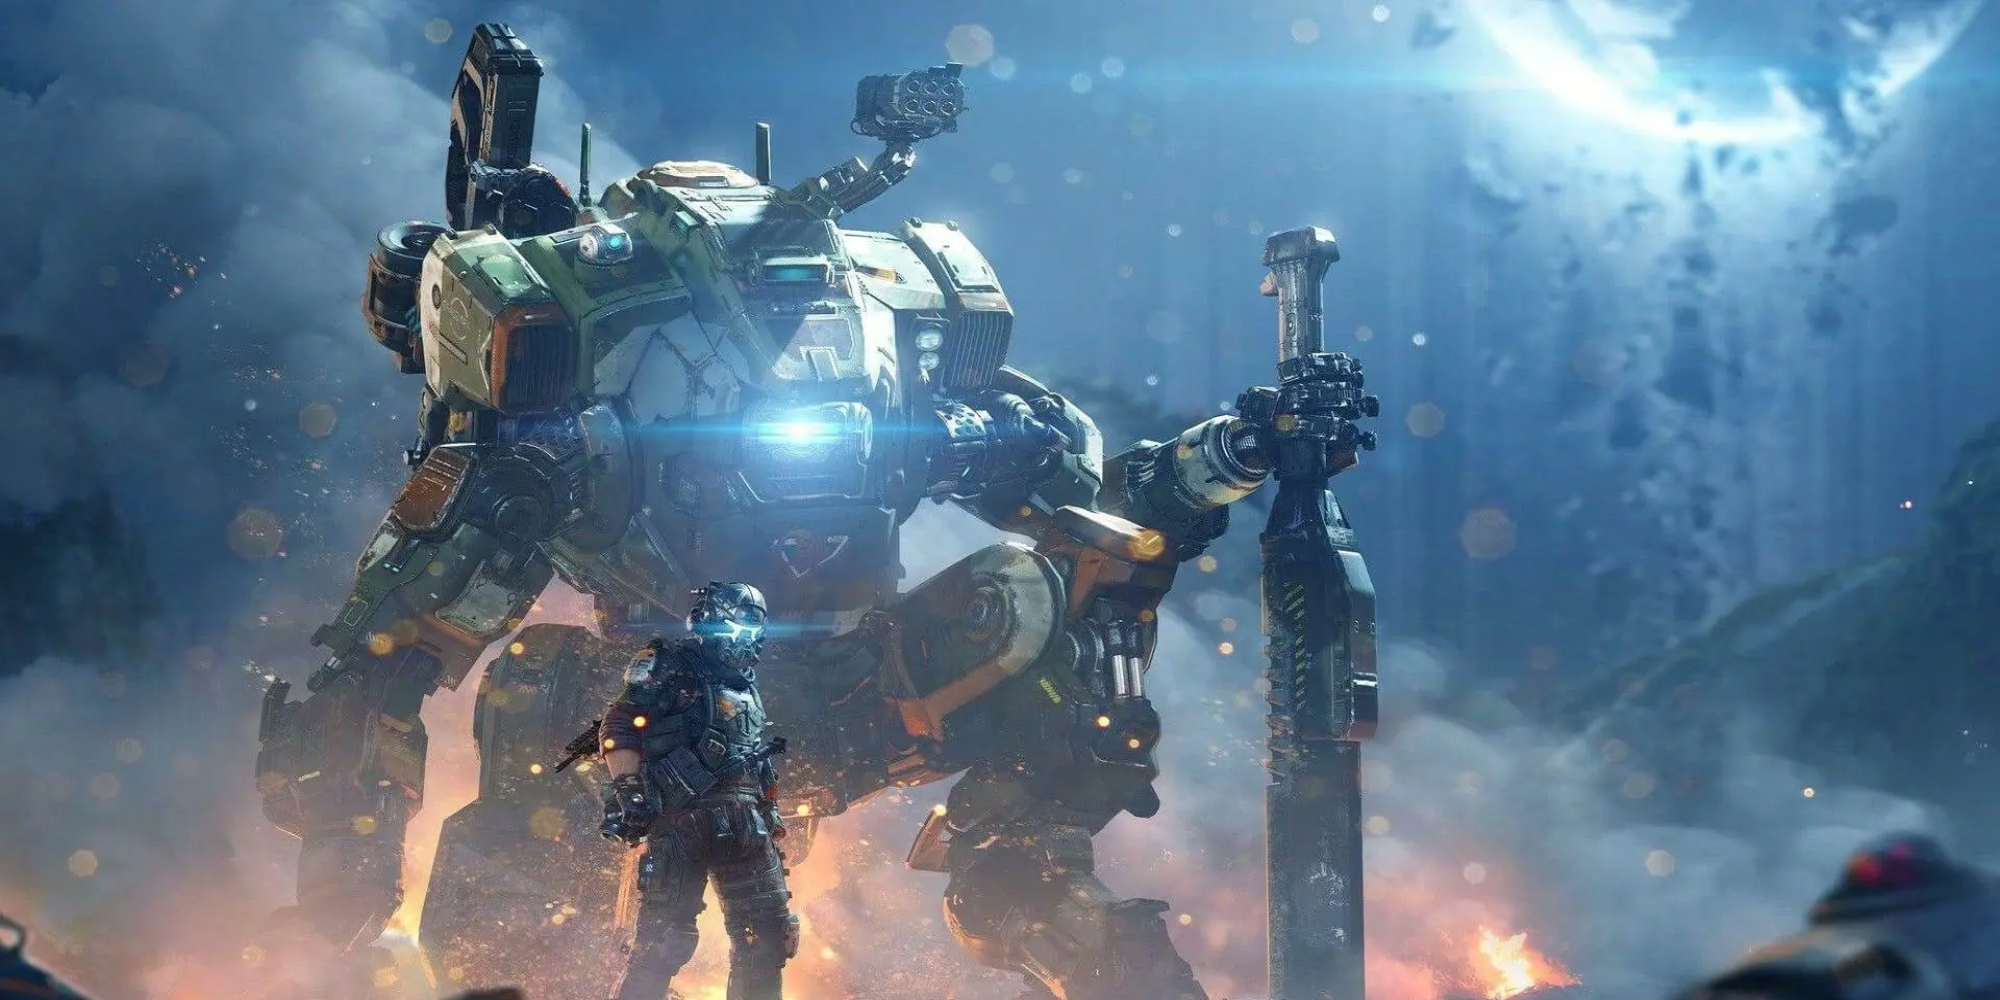 TITANFALL 2 IS SAVED 